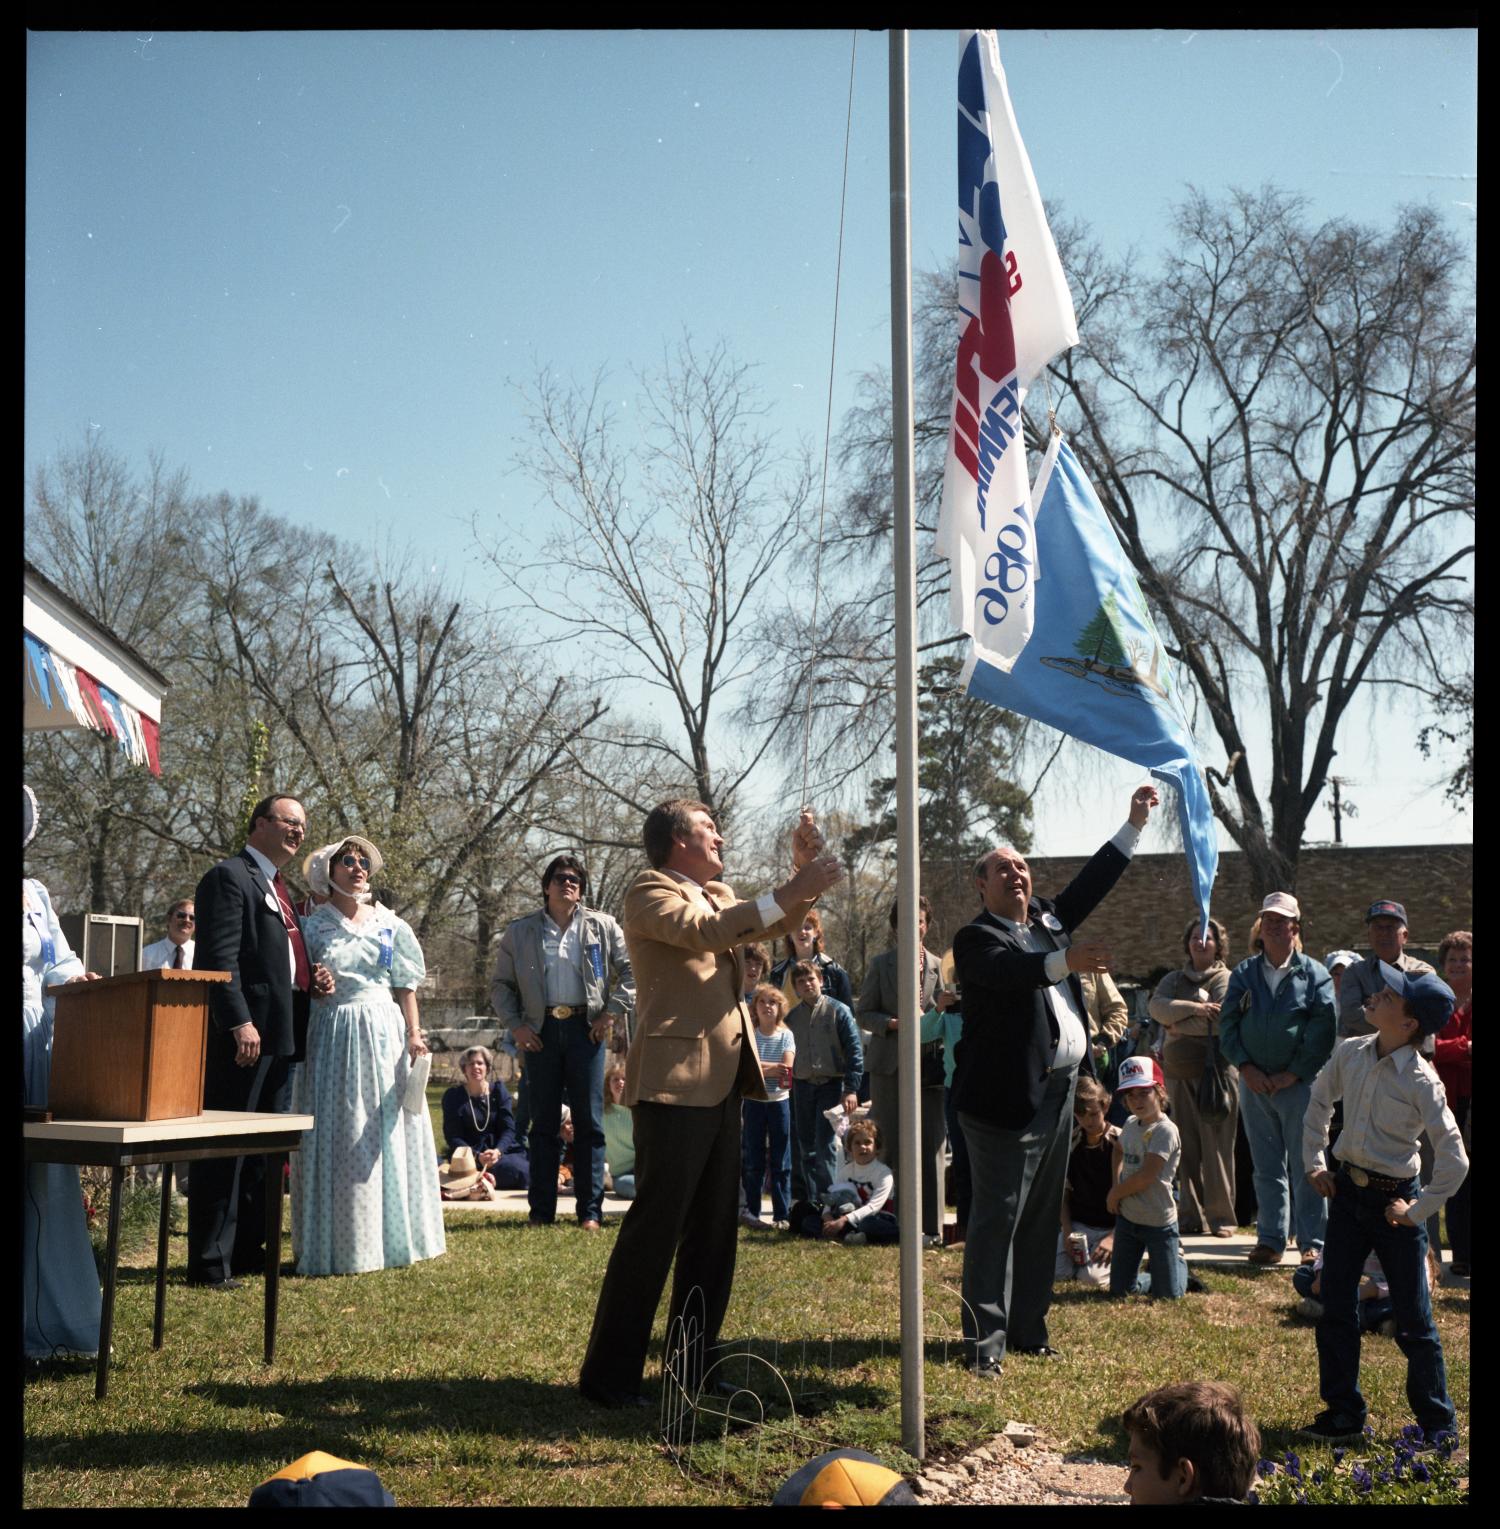 [1986 Texas Sesquicentennial Celebration]
                                                
                                                    [Sequence #]: 1 of 1
                                                